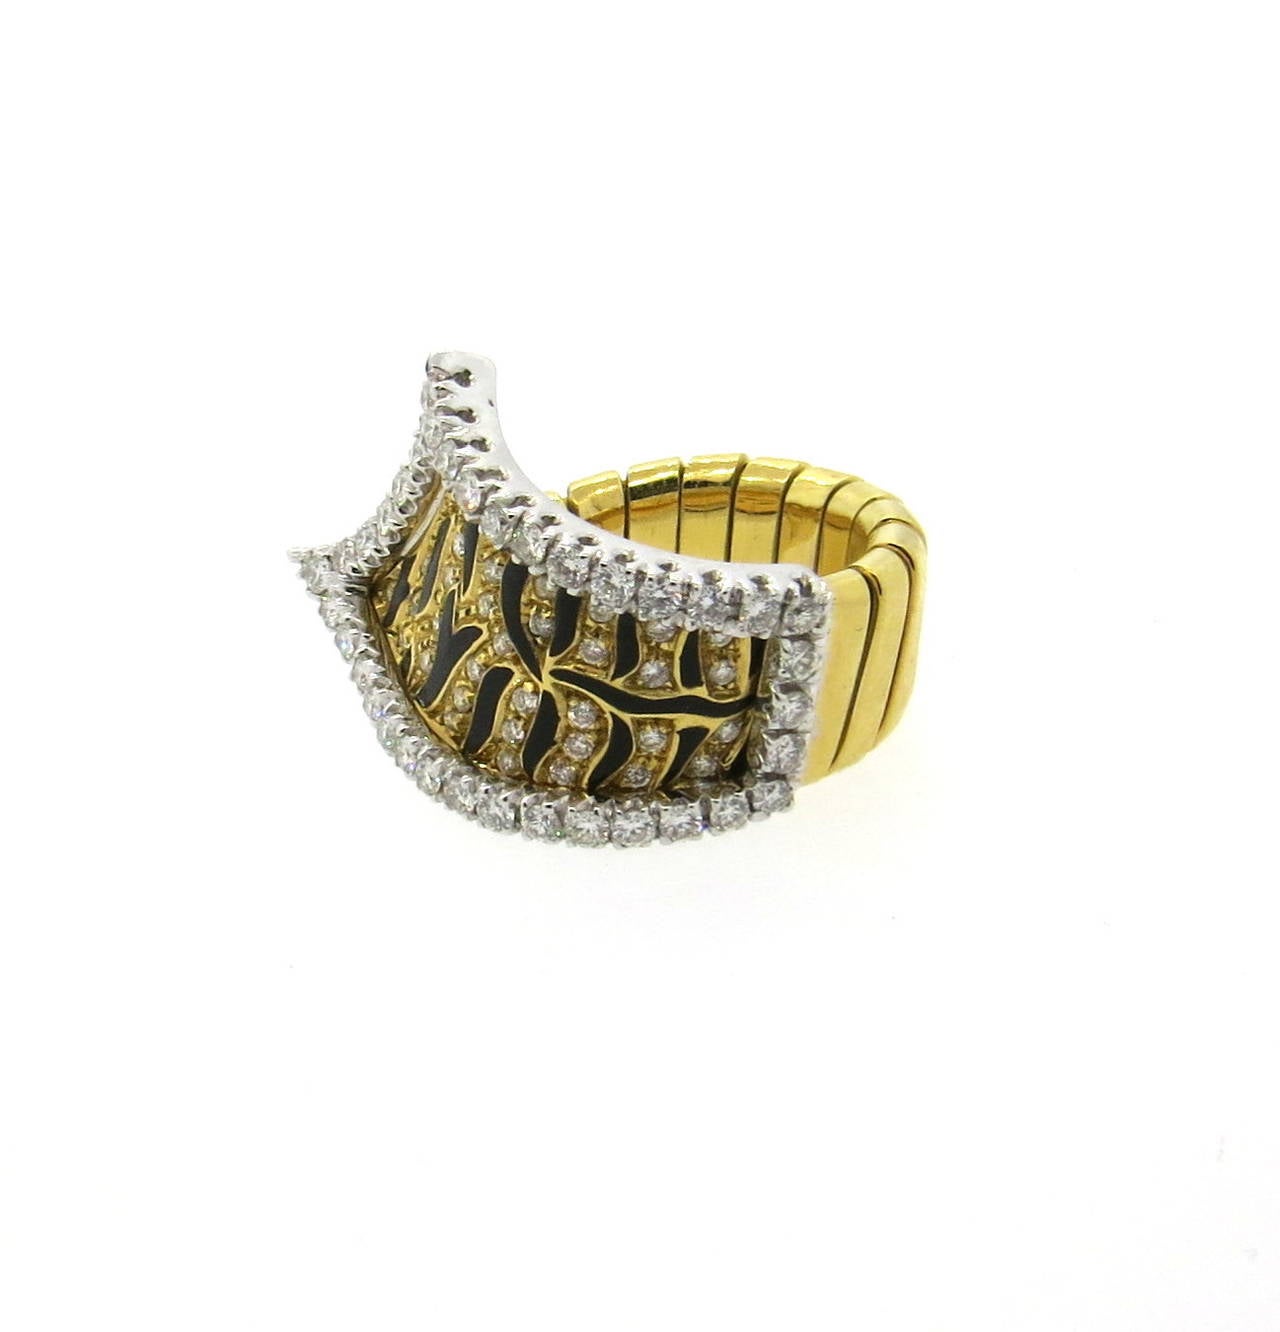 18k gold ring, decorated with approximately 1.20ctw in FG/VS diamonds and black enamel, featuring tiger stripes. Ring is a size 6 (slightly flexible) , ring top is 16mm x 30mm. Weight of the piece - 16 grams